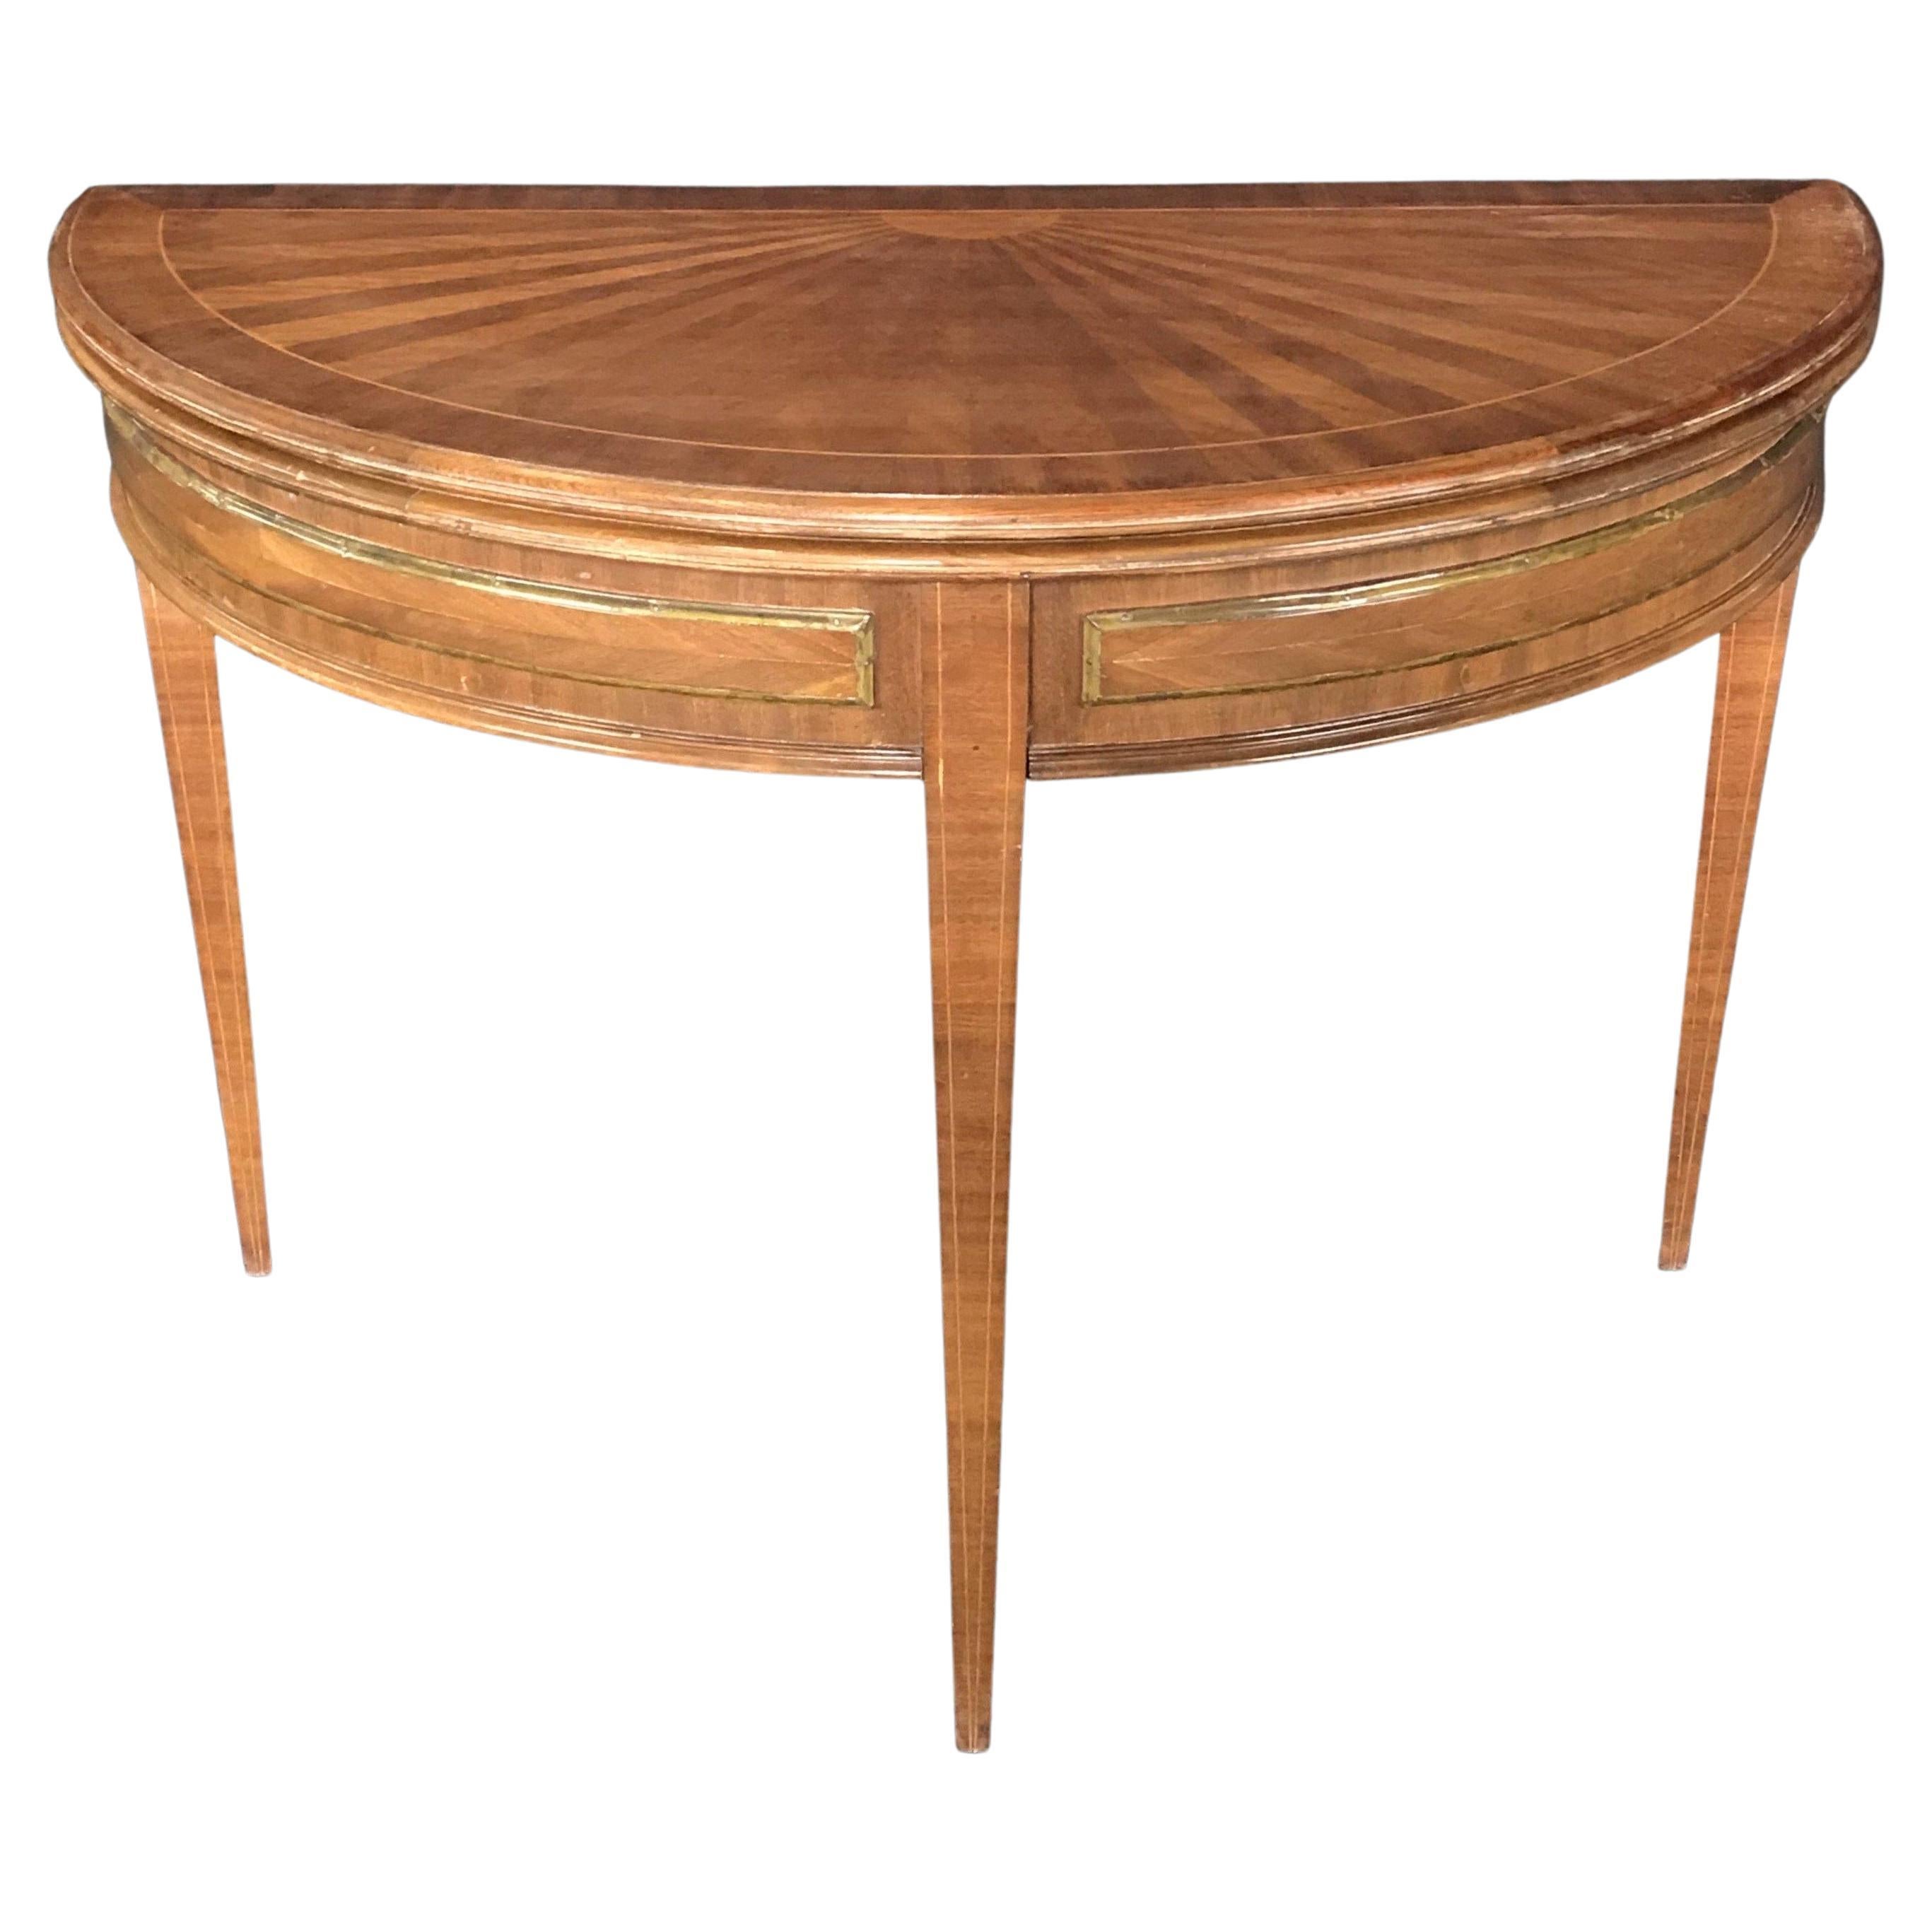 French Walnut Demilune Table Round Table with Leather Top